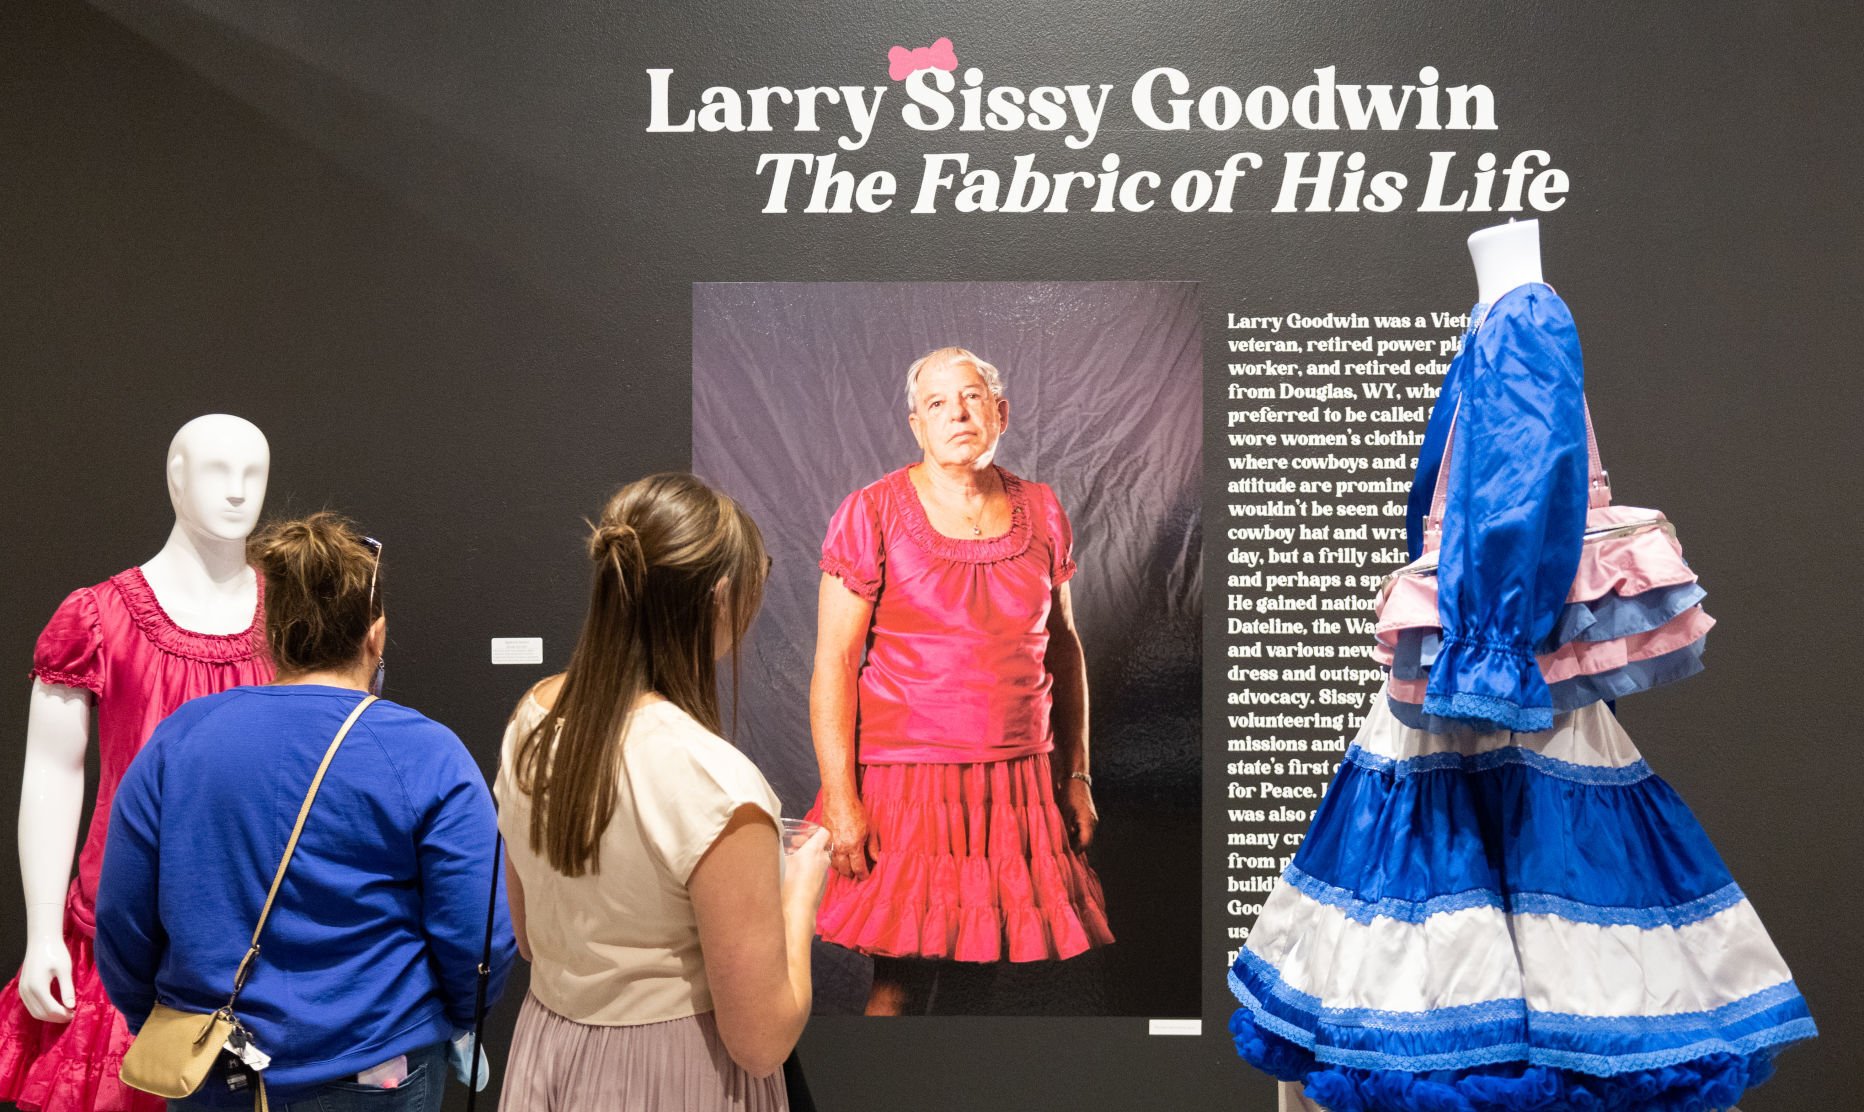 Sissy Goodwin gained national attention as a Wyoming man who wore womens clothes picture